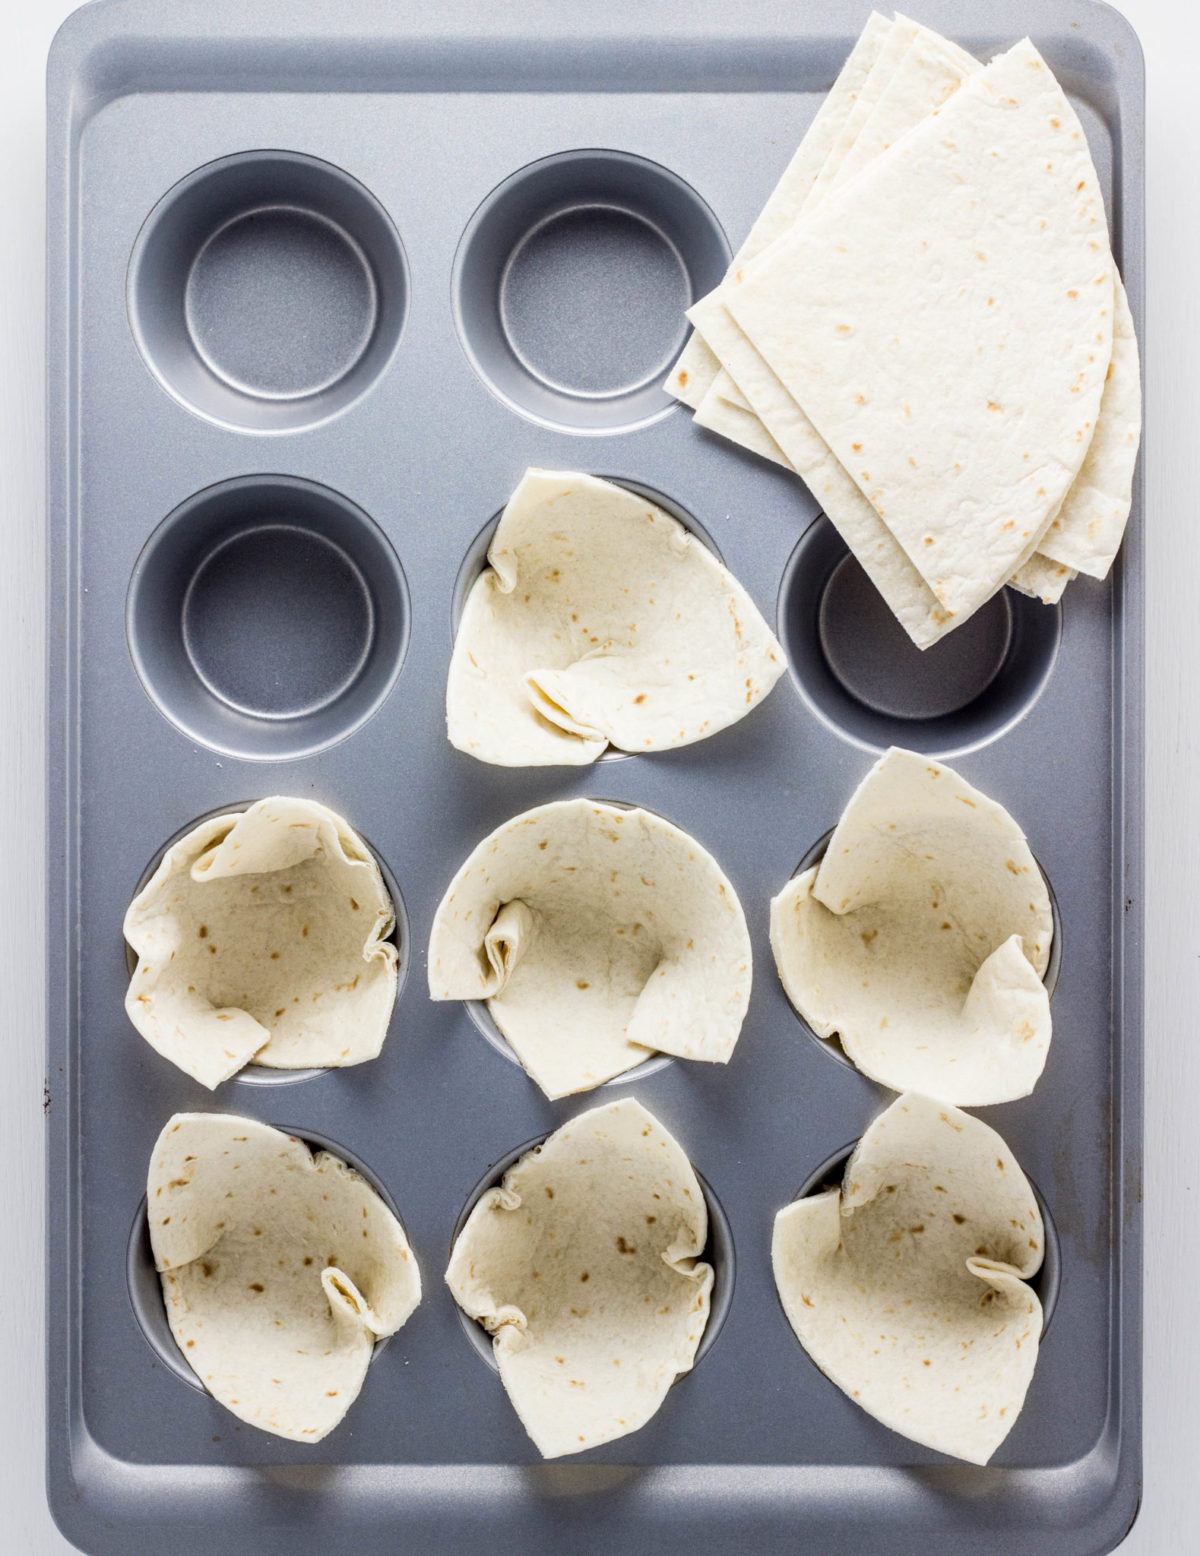 Top view of mudding pan with tortillas  folded into cups. 